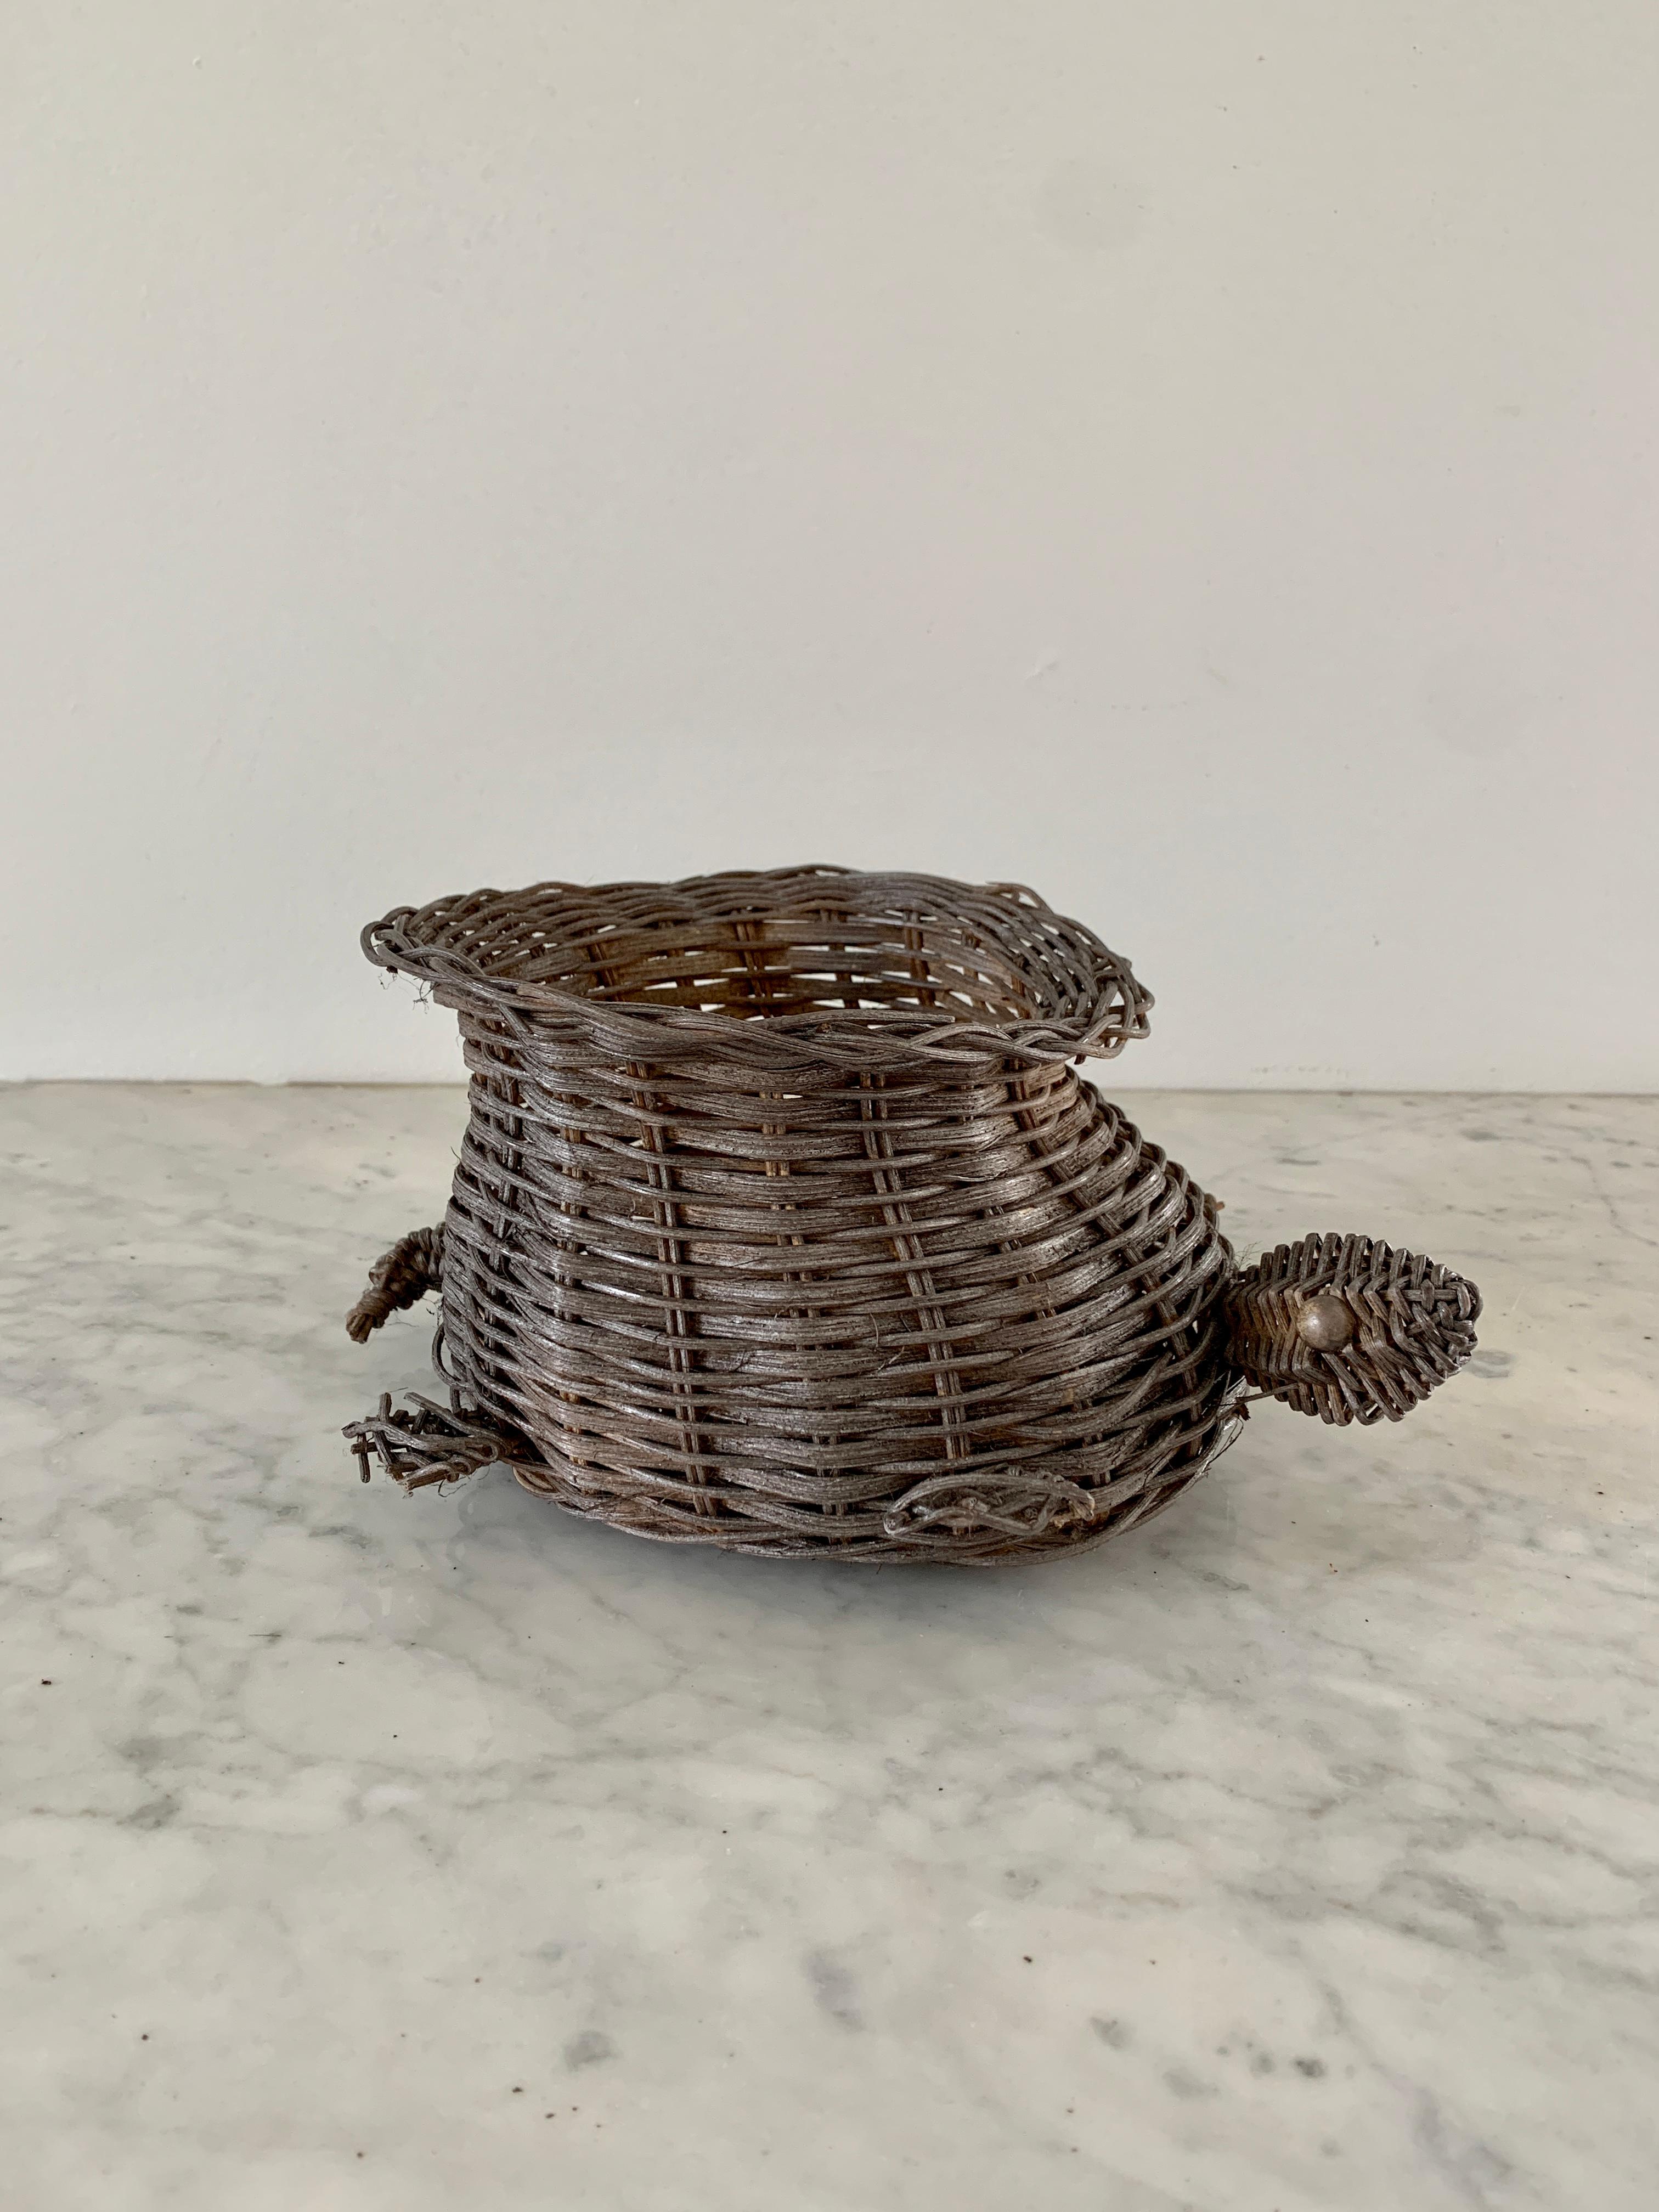 A gorgeous woven wicker basket in the form of a turtle, perfectly wonky to add character to any space. This piece could be used as a catchall or to hold a potted plant.

USA, circa 1970s.

Measures : 10